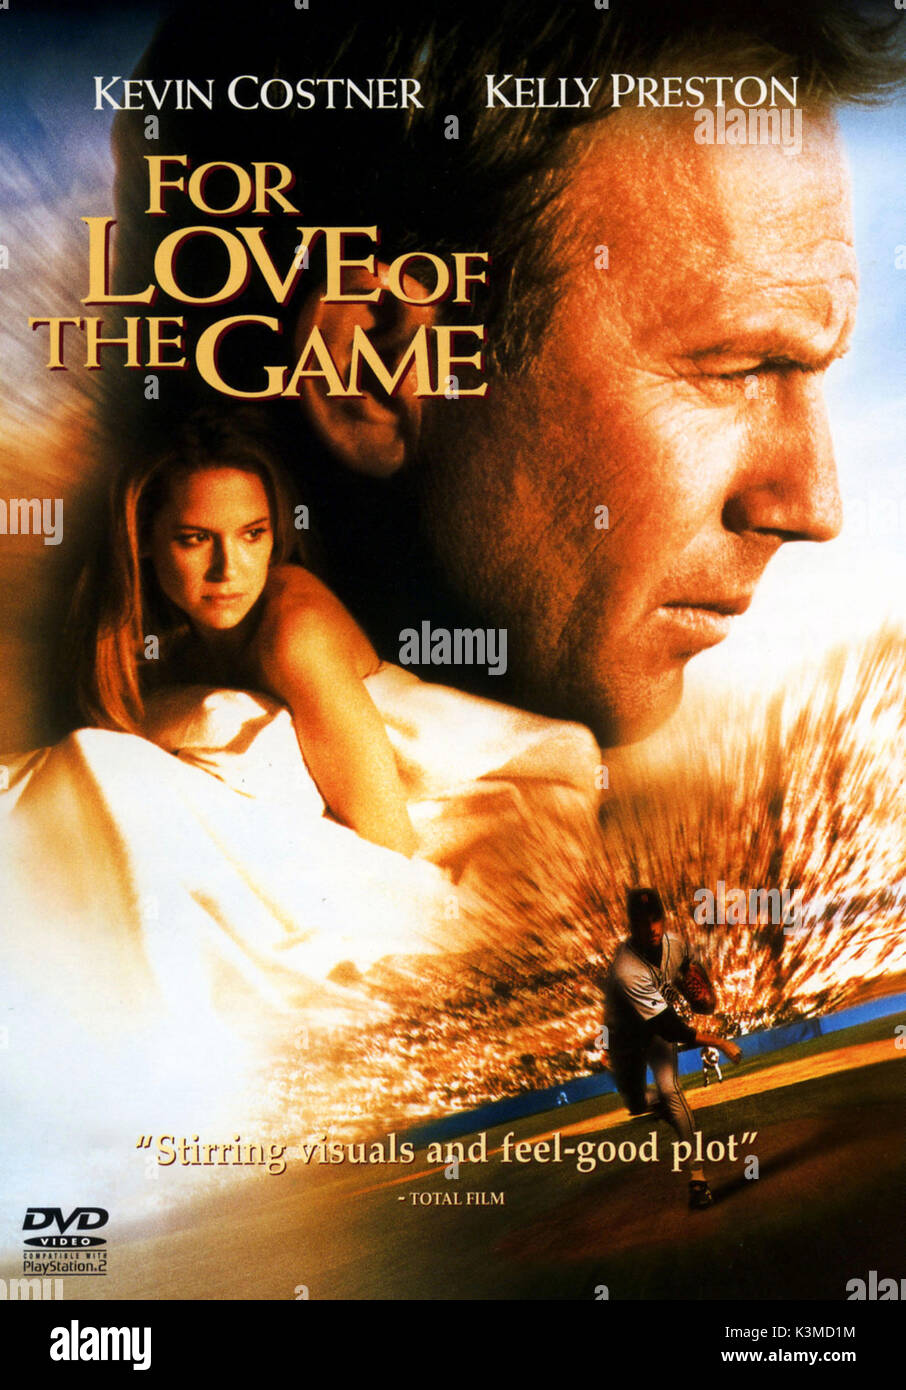 For Love of the Game review (1999) Kevin Costner - Qwipster's Movie Reviews